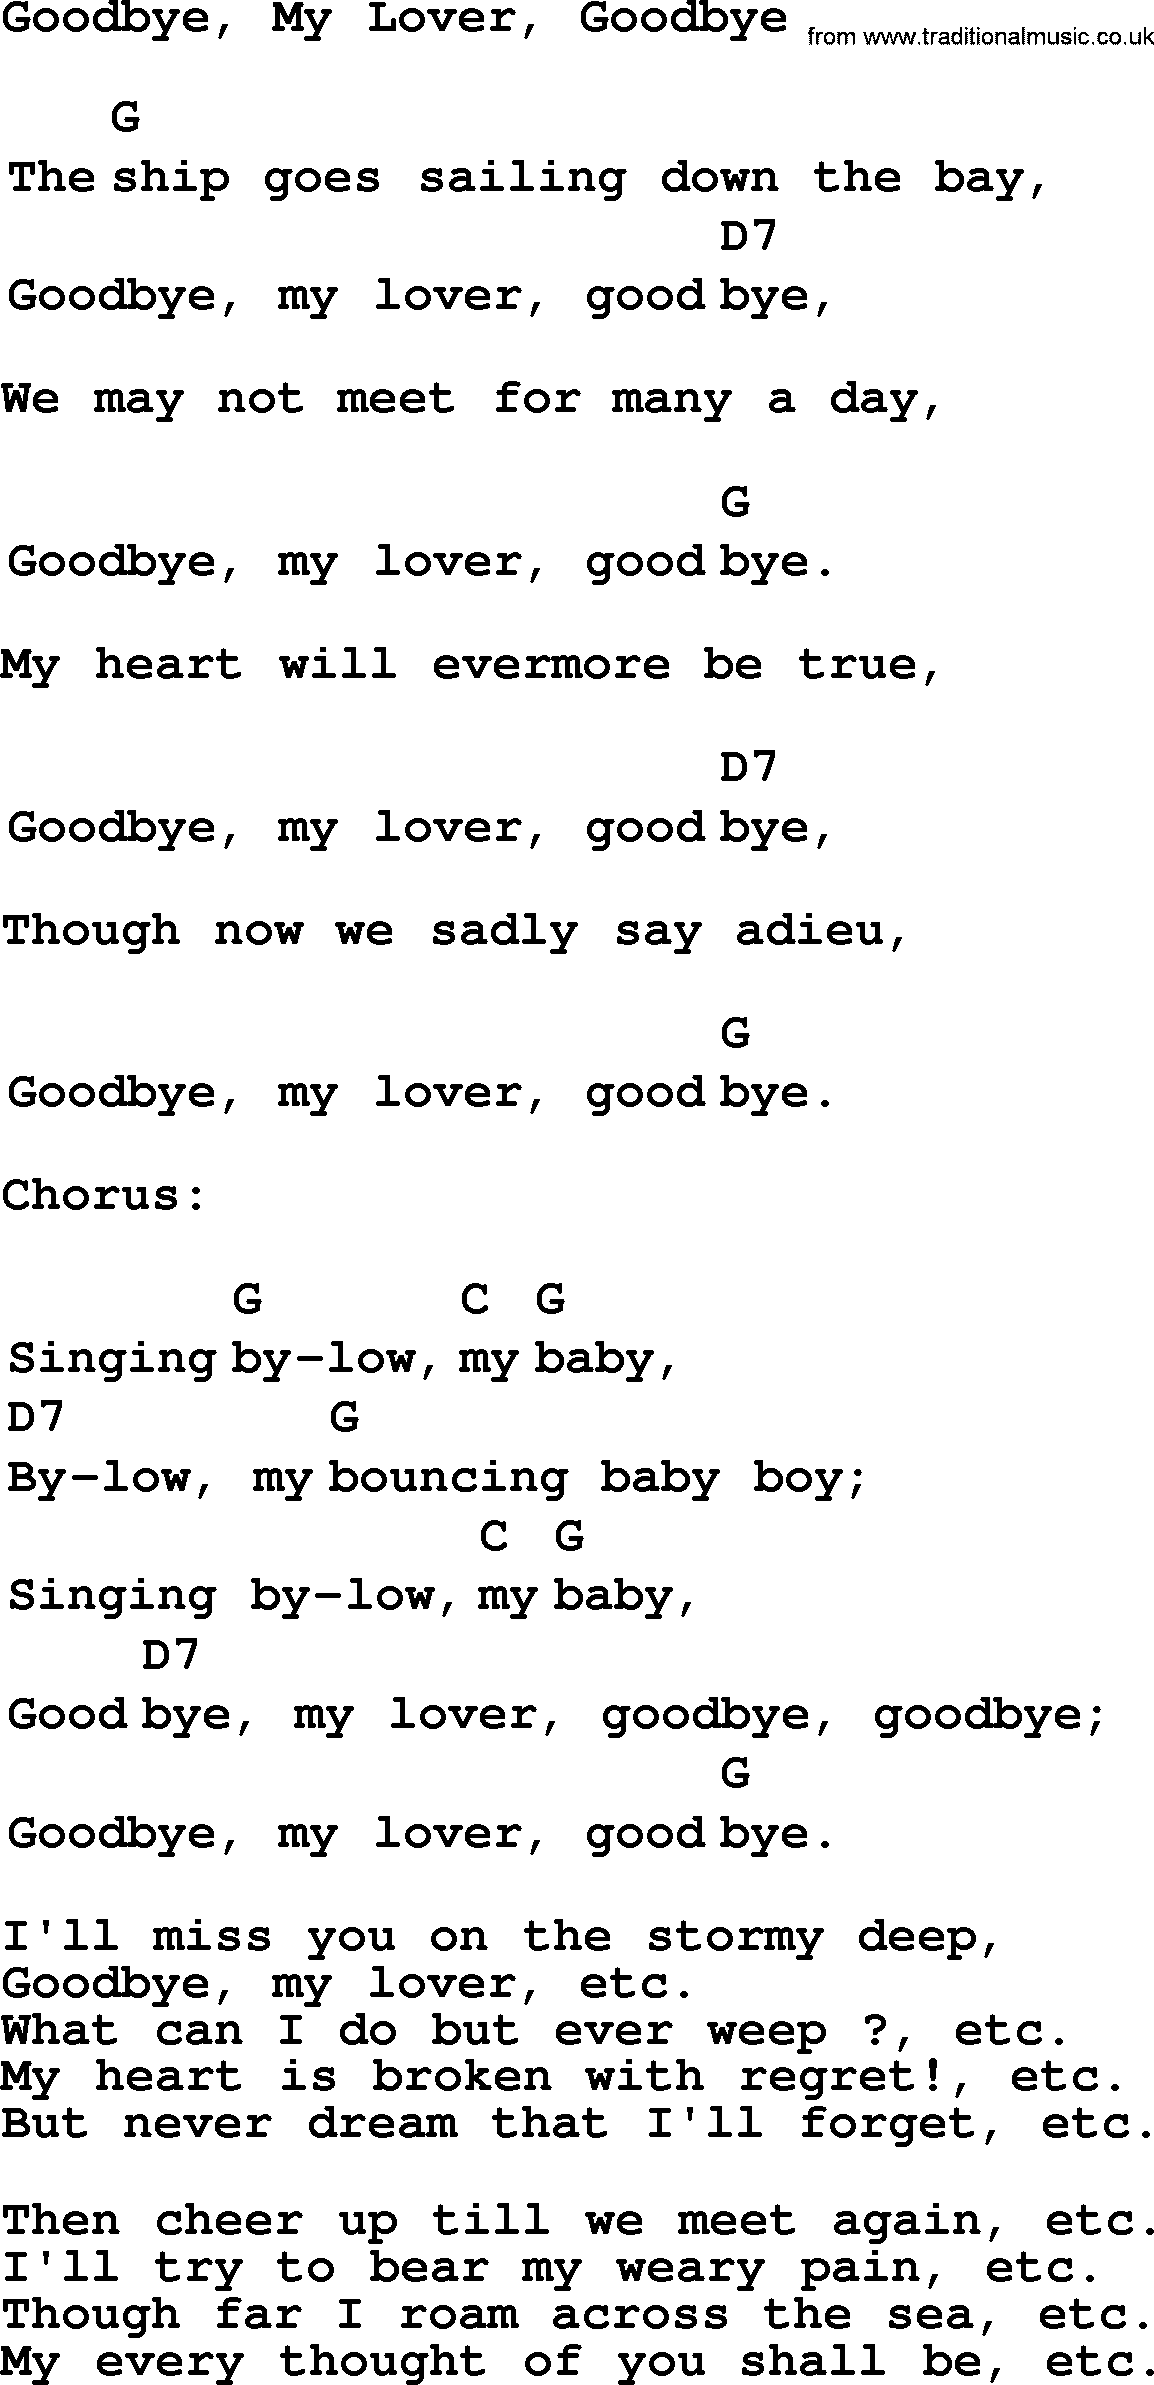 Top 1000 Most Popular Folk and Old-time Songs: Goodbye, My Lover, Goodbye, lyrics and chords